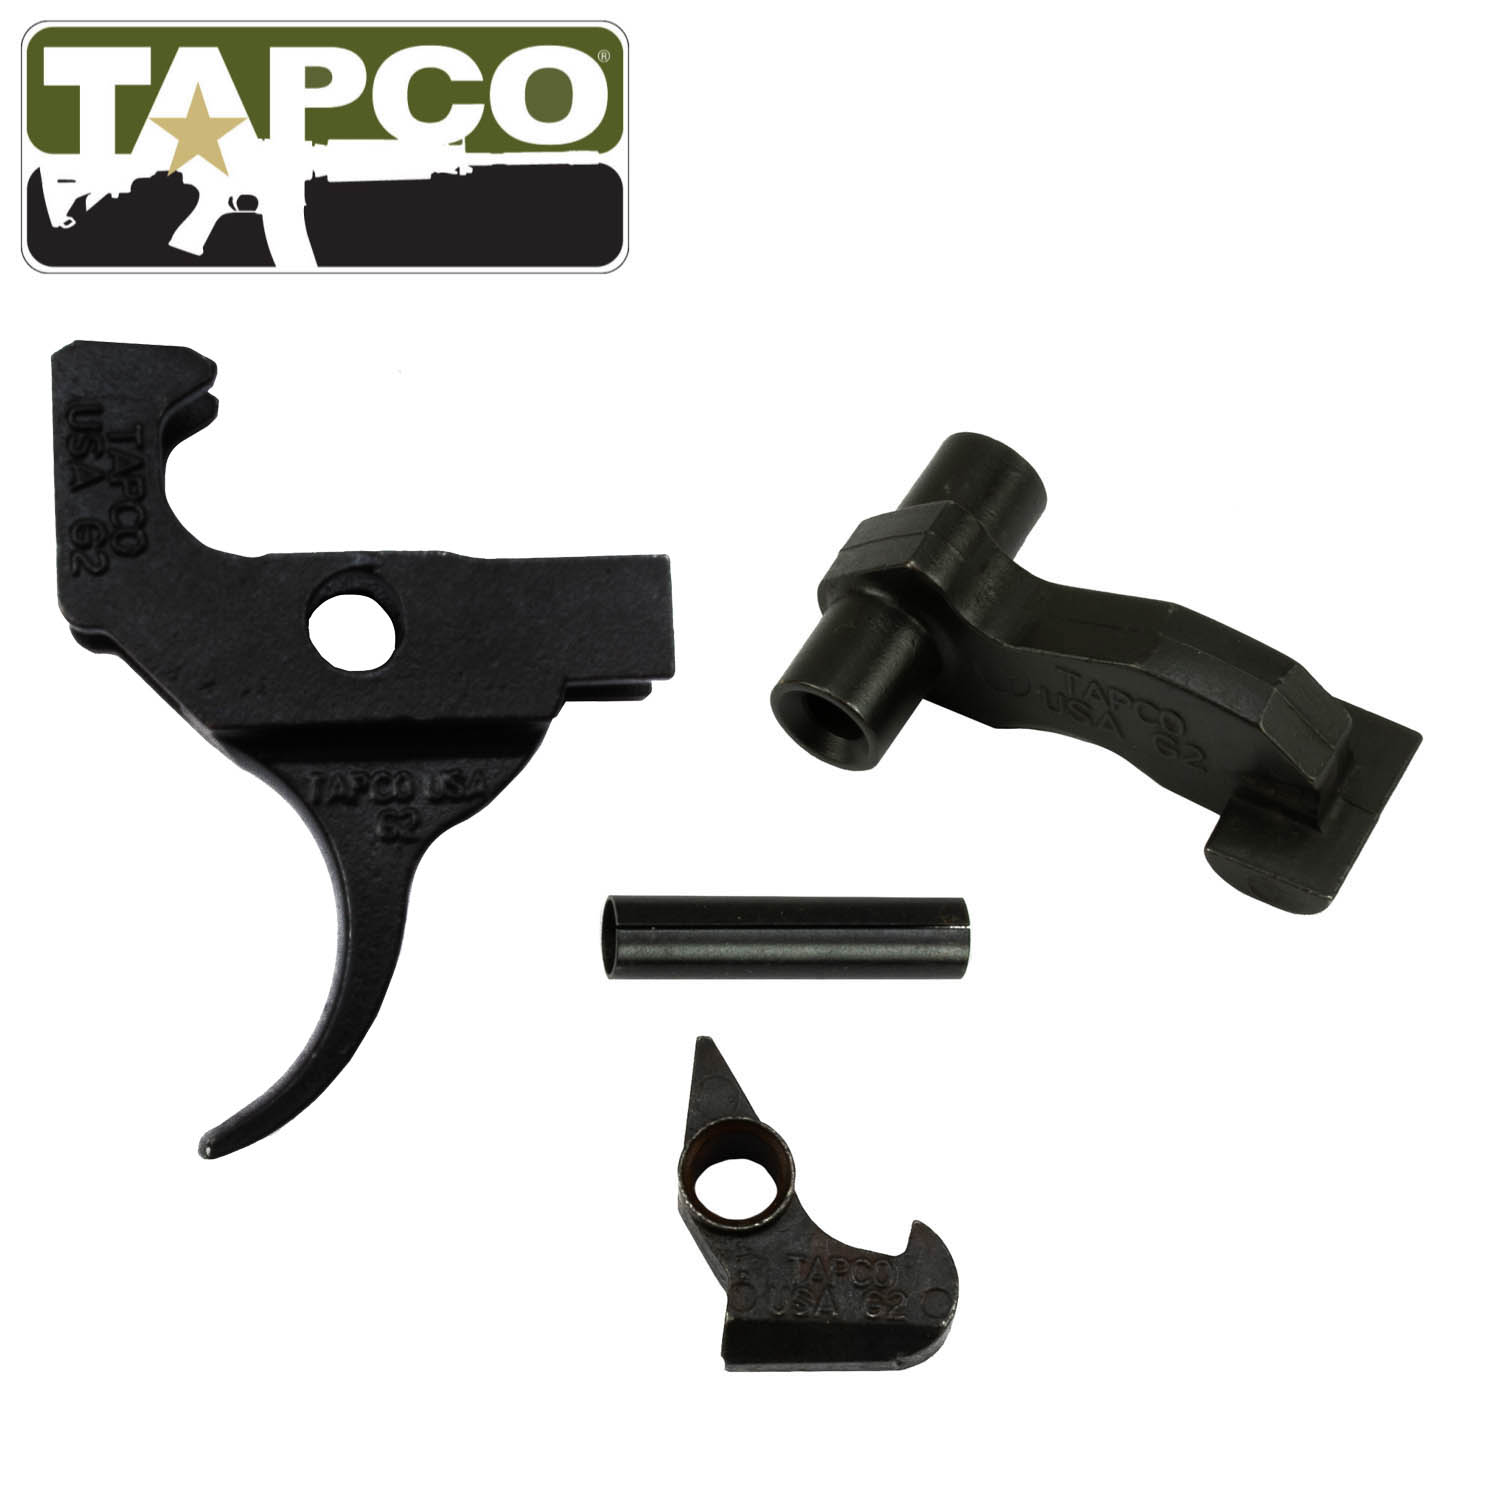 TAPCO AK G2 Trigger Group, Double Hook.